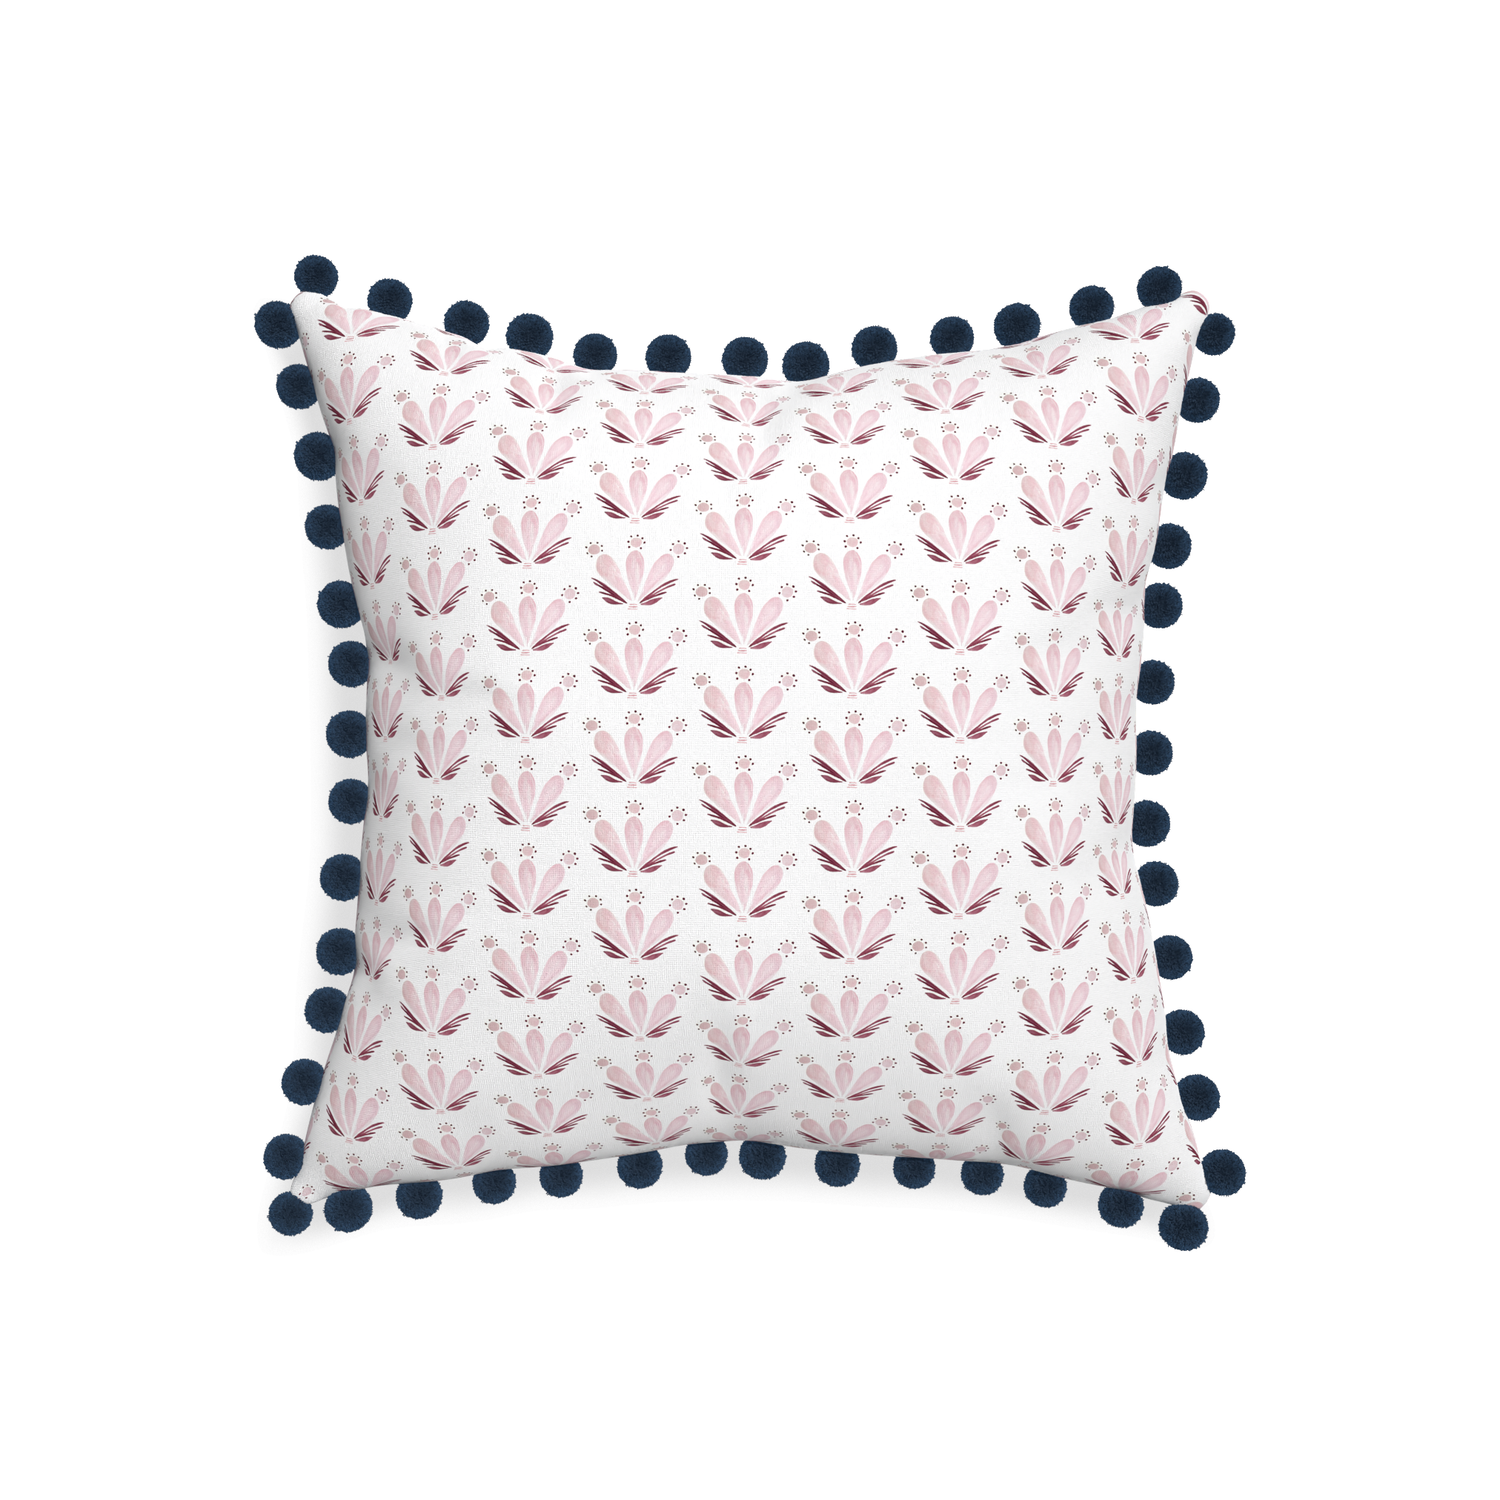 20-square serena pink custom pink & burgundy drop repeat floralpillow with c on white background